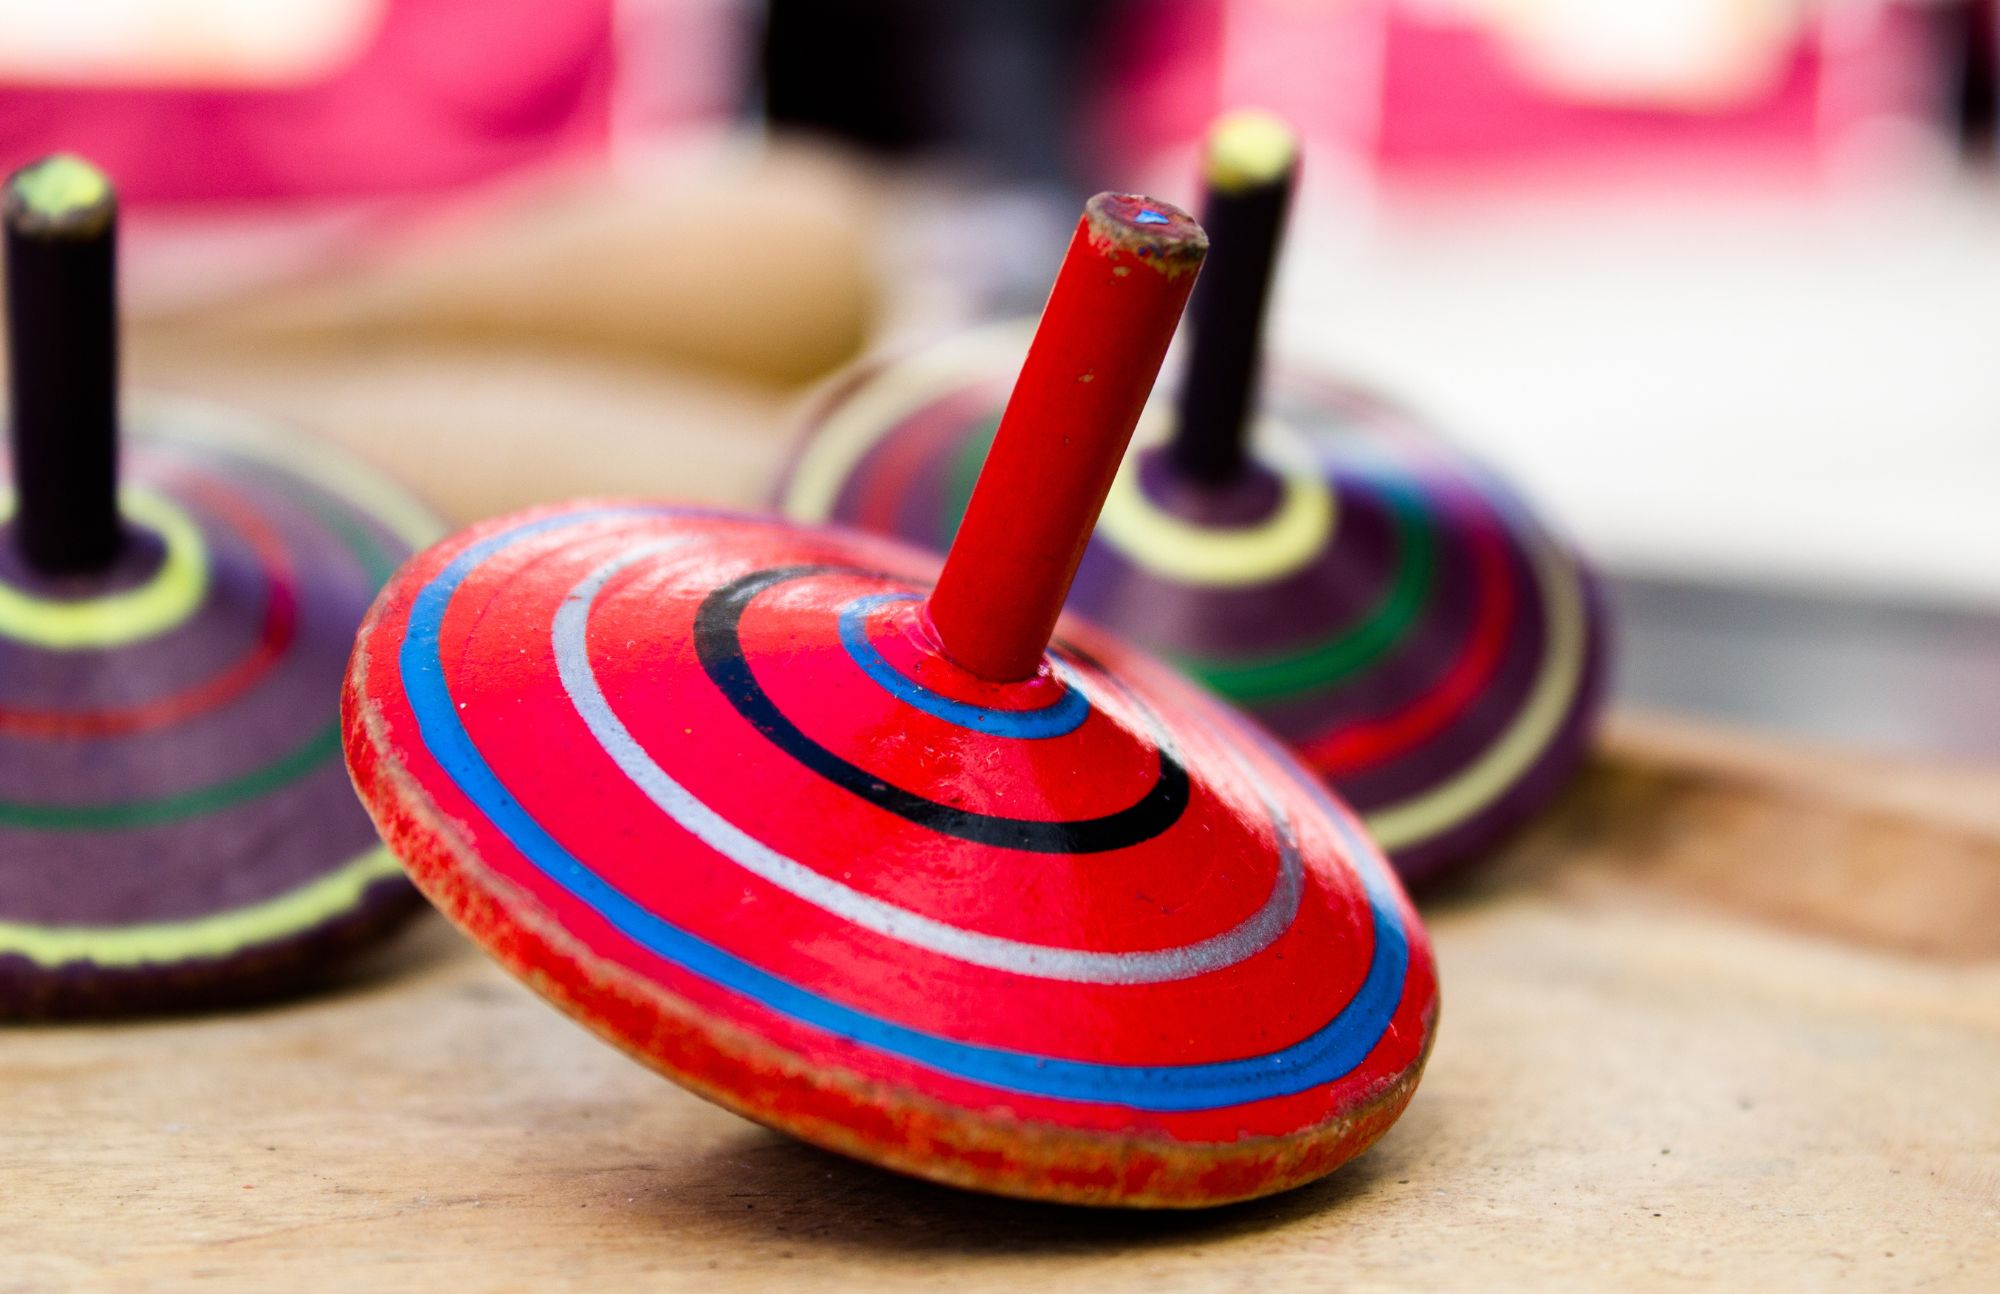 Three colorful striped spinning tops